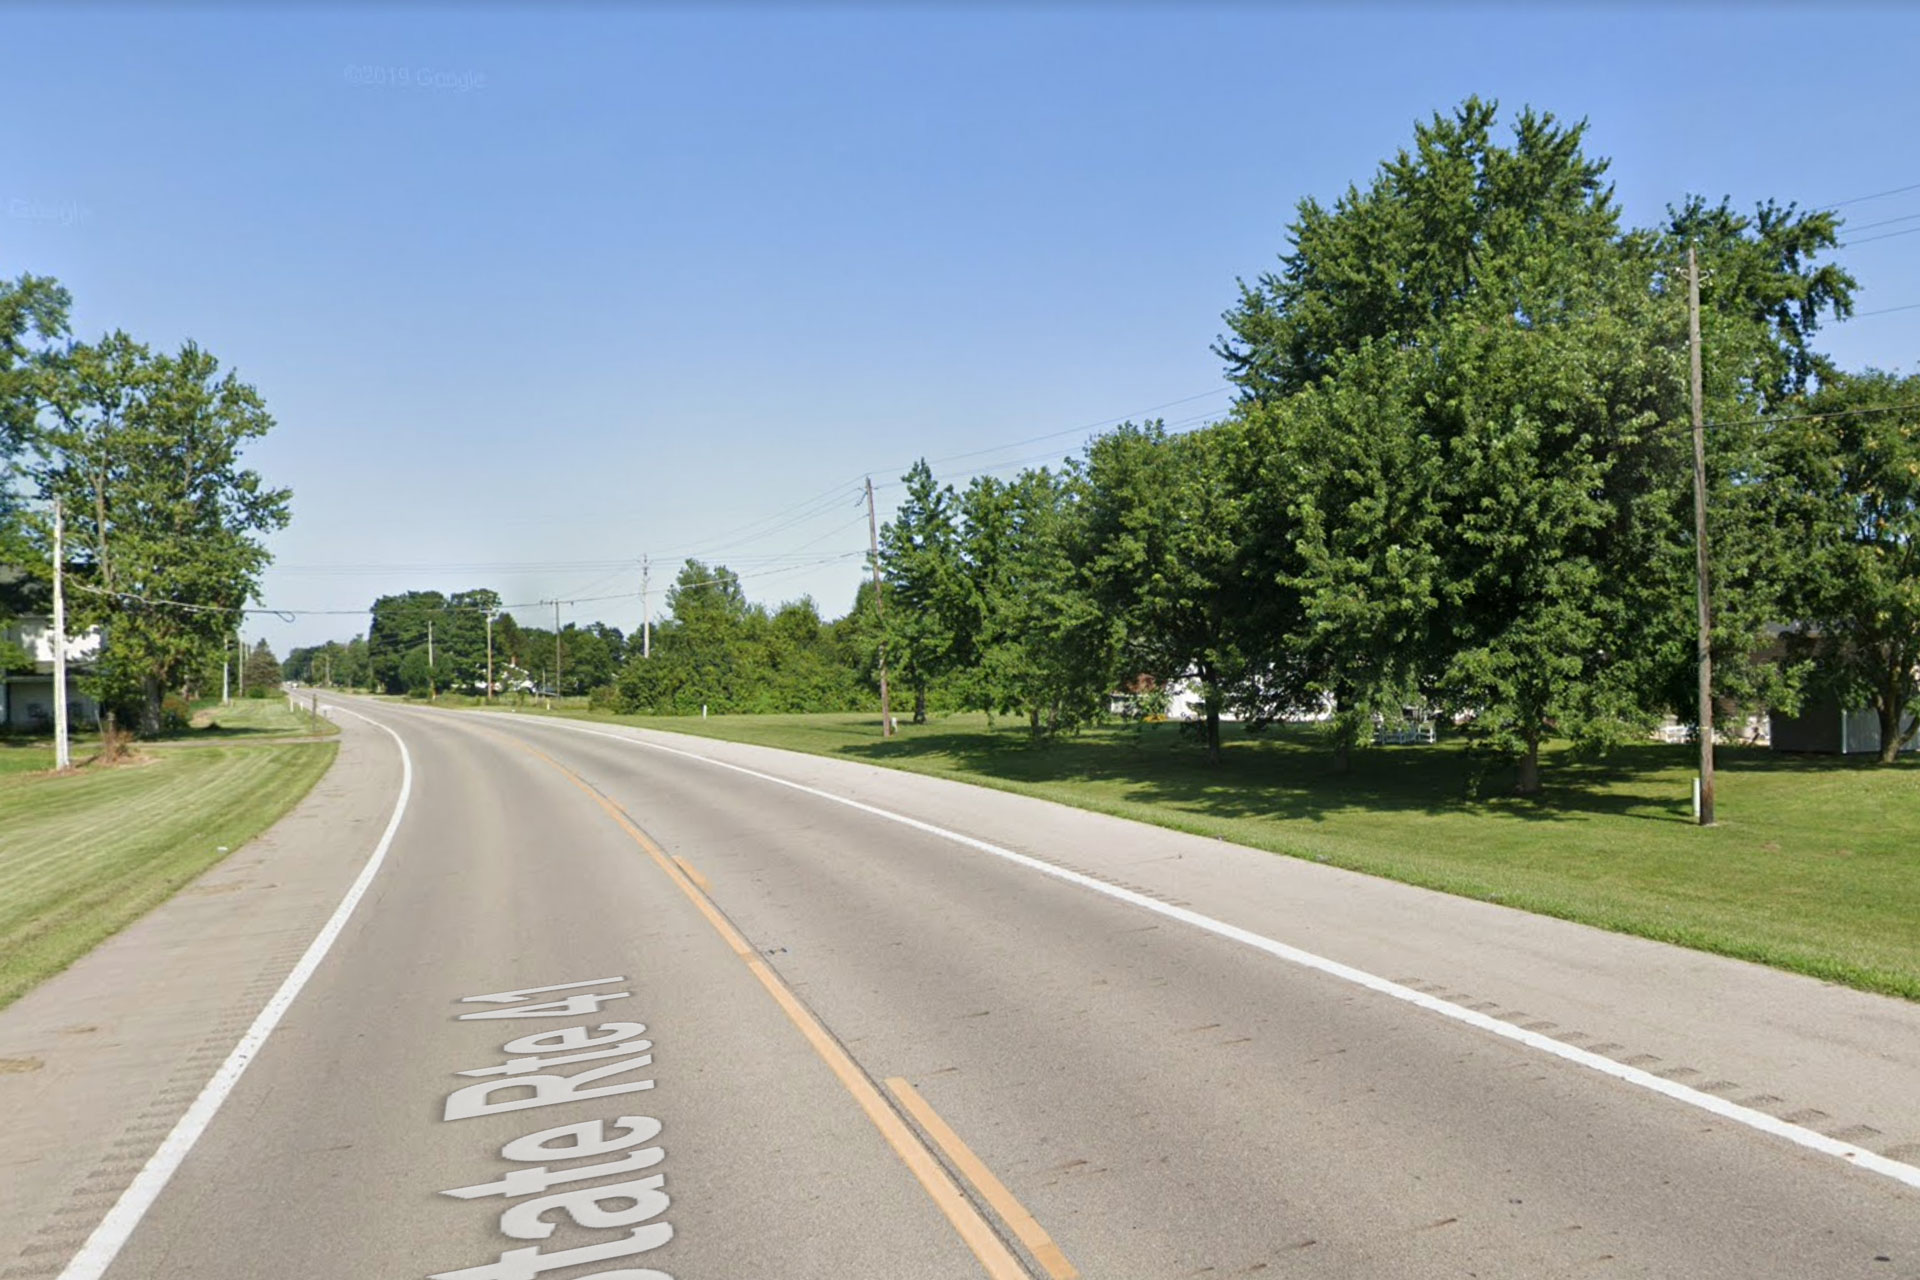 The location on Ohio State Road 41 near Lawrenceville Road, based on police statements and media photos, where a minivan collided with a school bus nearly head-on, resulting in a student fatality and 23 injuries on Tuesday, Aug. 22, 2023.